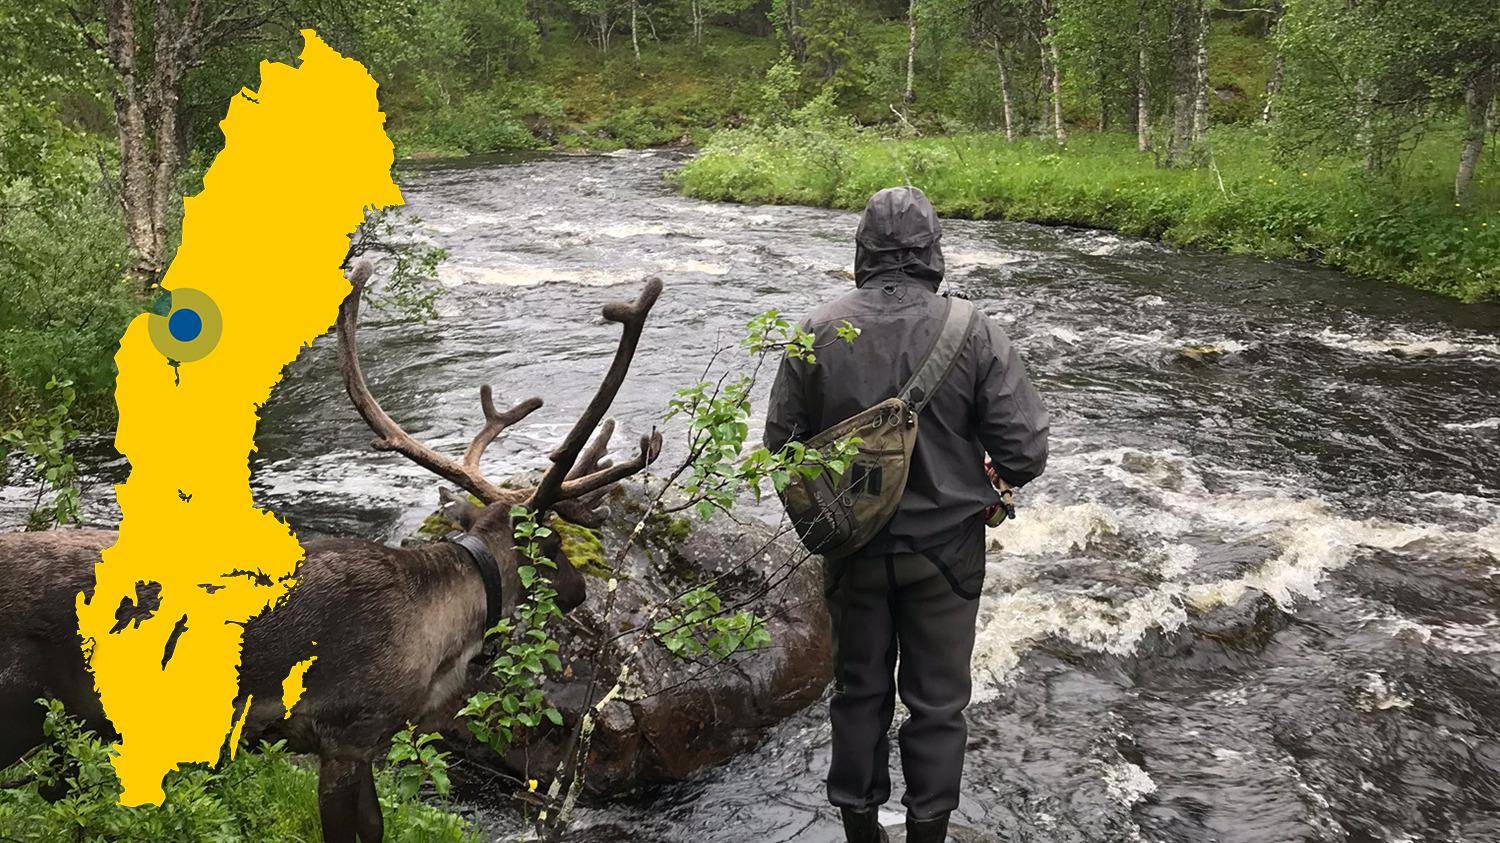 A reindeer and a person looking towards a river. A yellow map of Sweden with a mark locating Laxviken is placed in the picture.